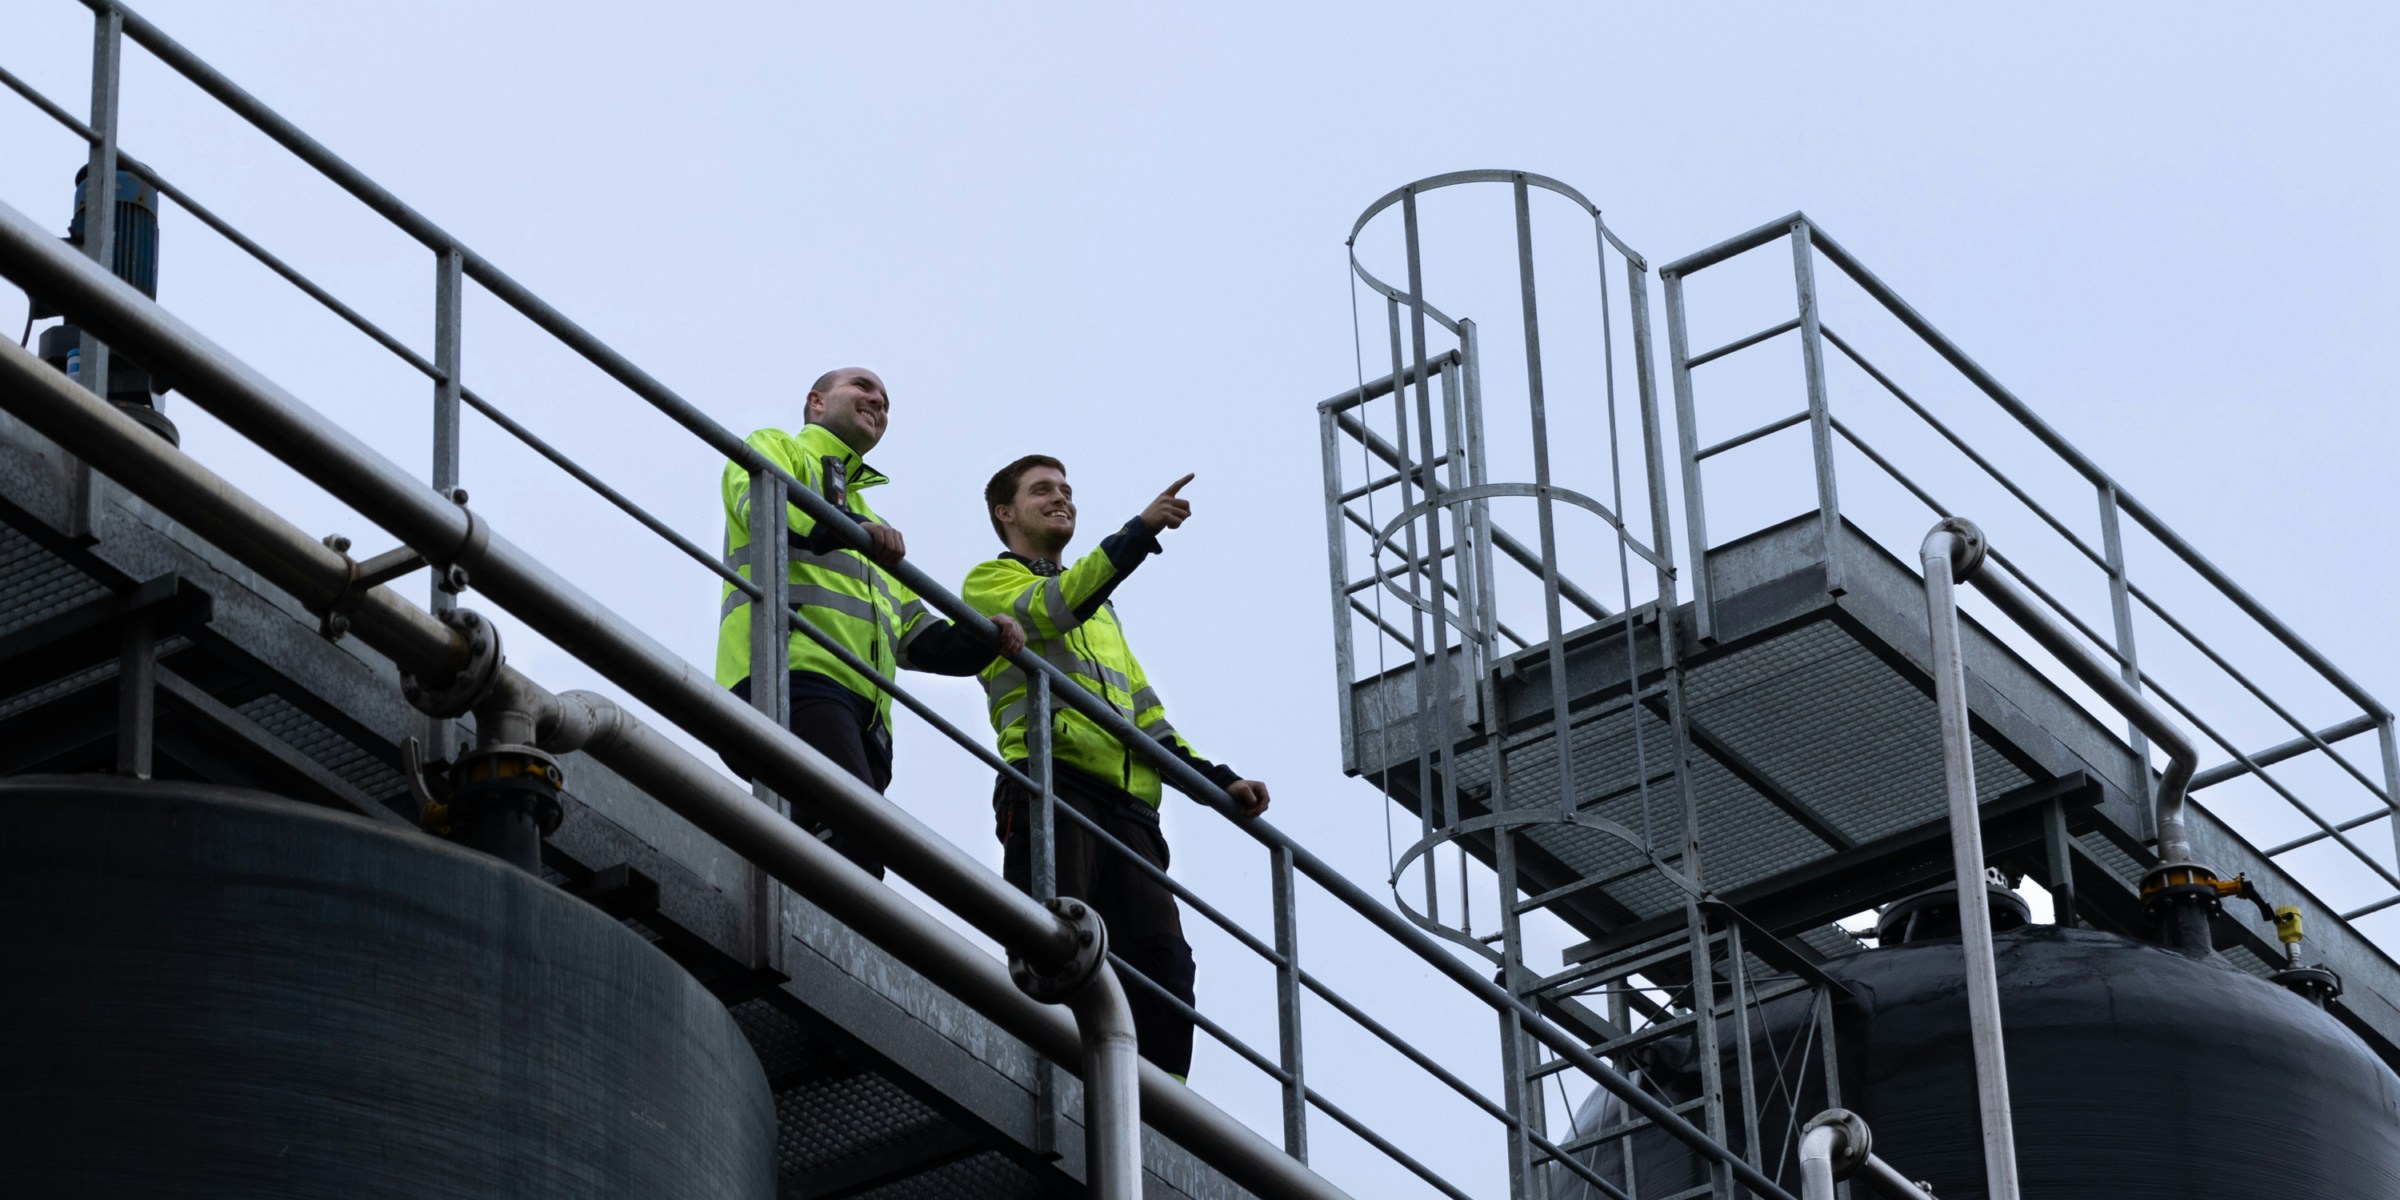 Employees on top of a biogas plant